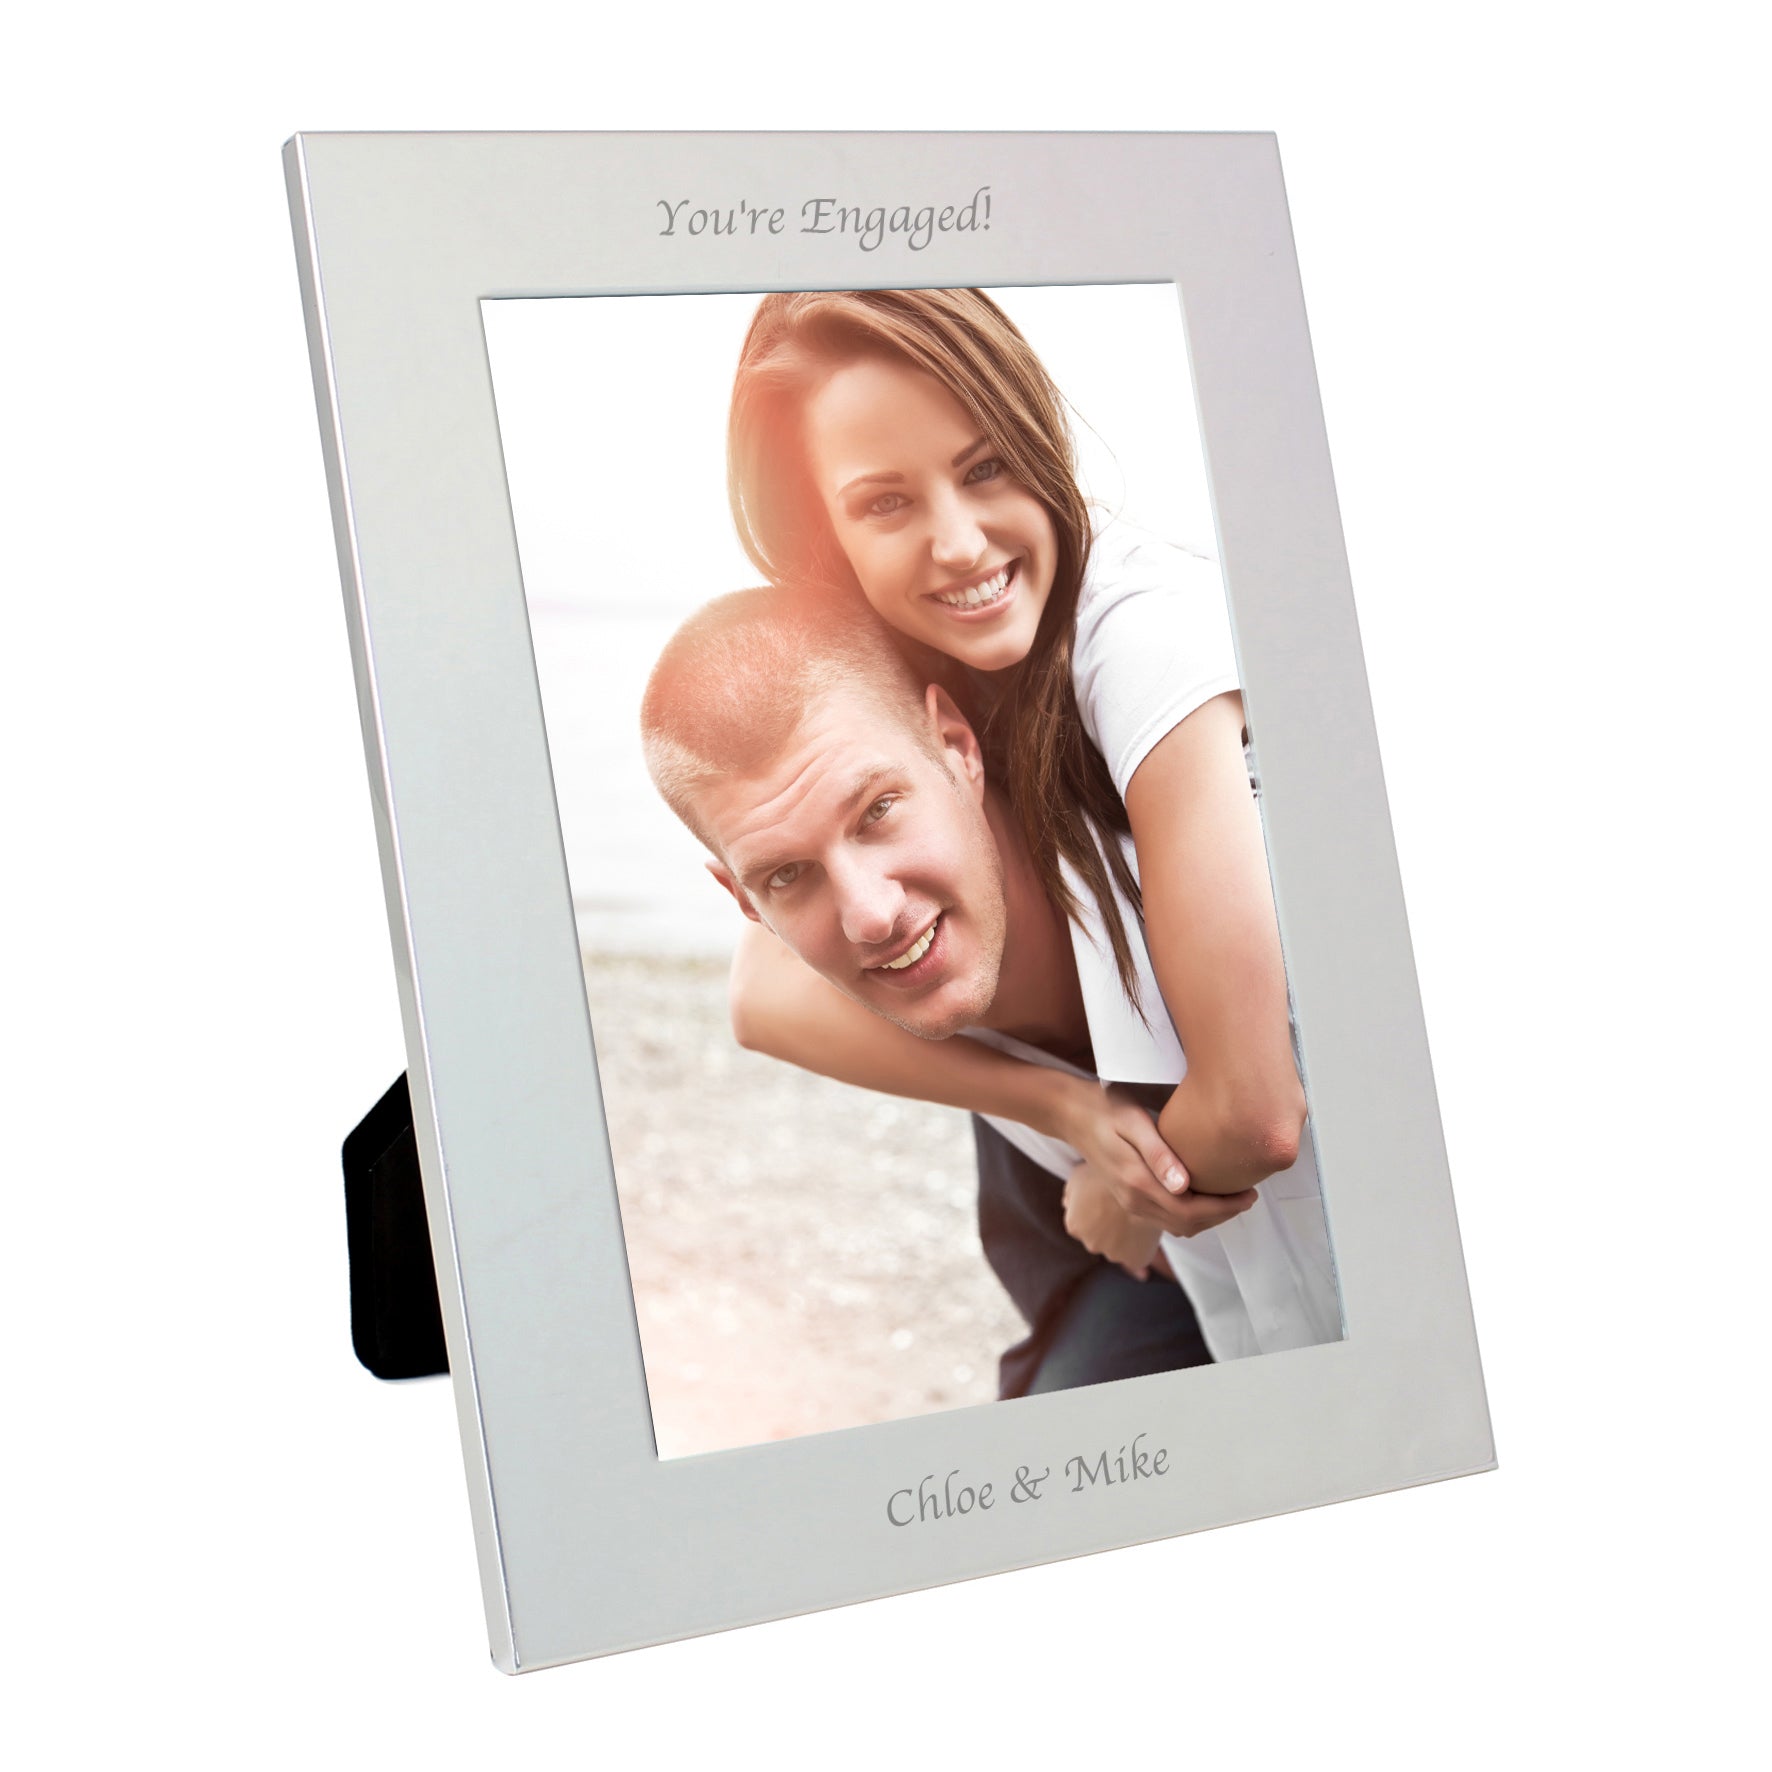 Personalised Silver 5x7 Photo Frame